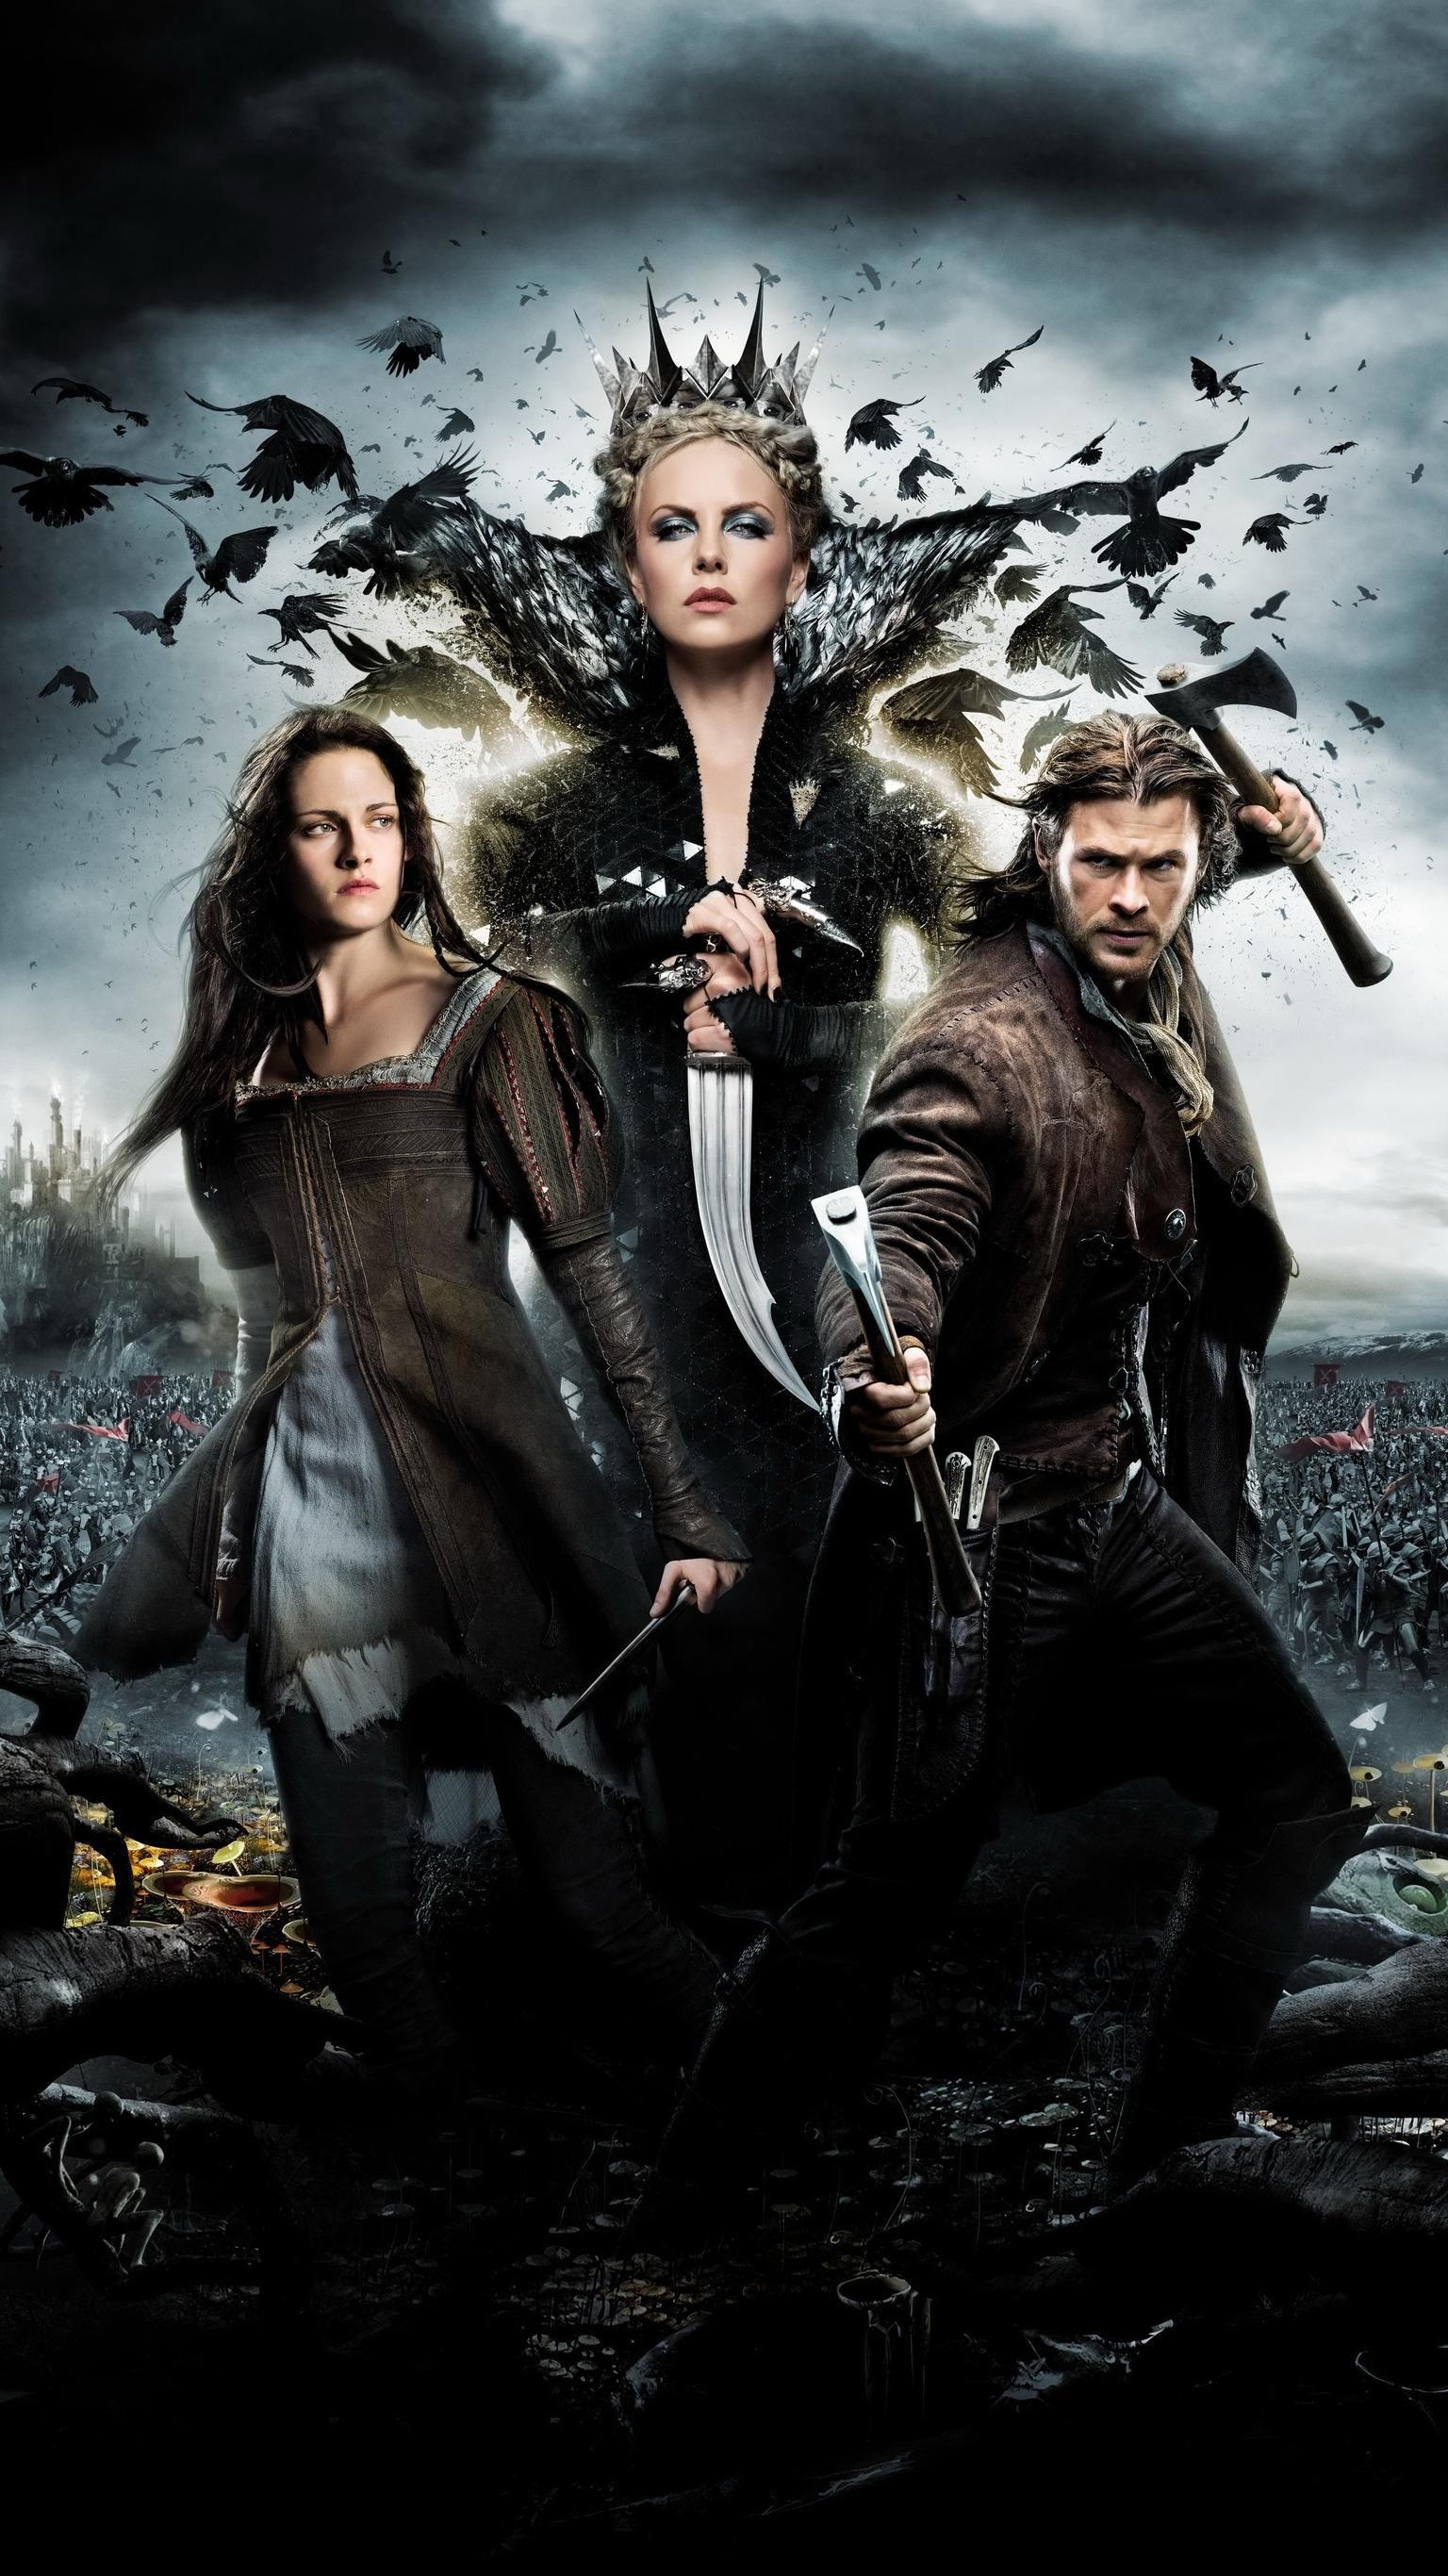 Snow White and the Huntsman, Phone wallpaper, Movie mania, Coolest films, 1540x2740 HD Phone